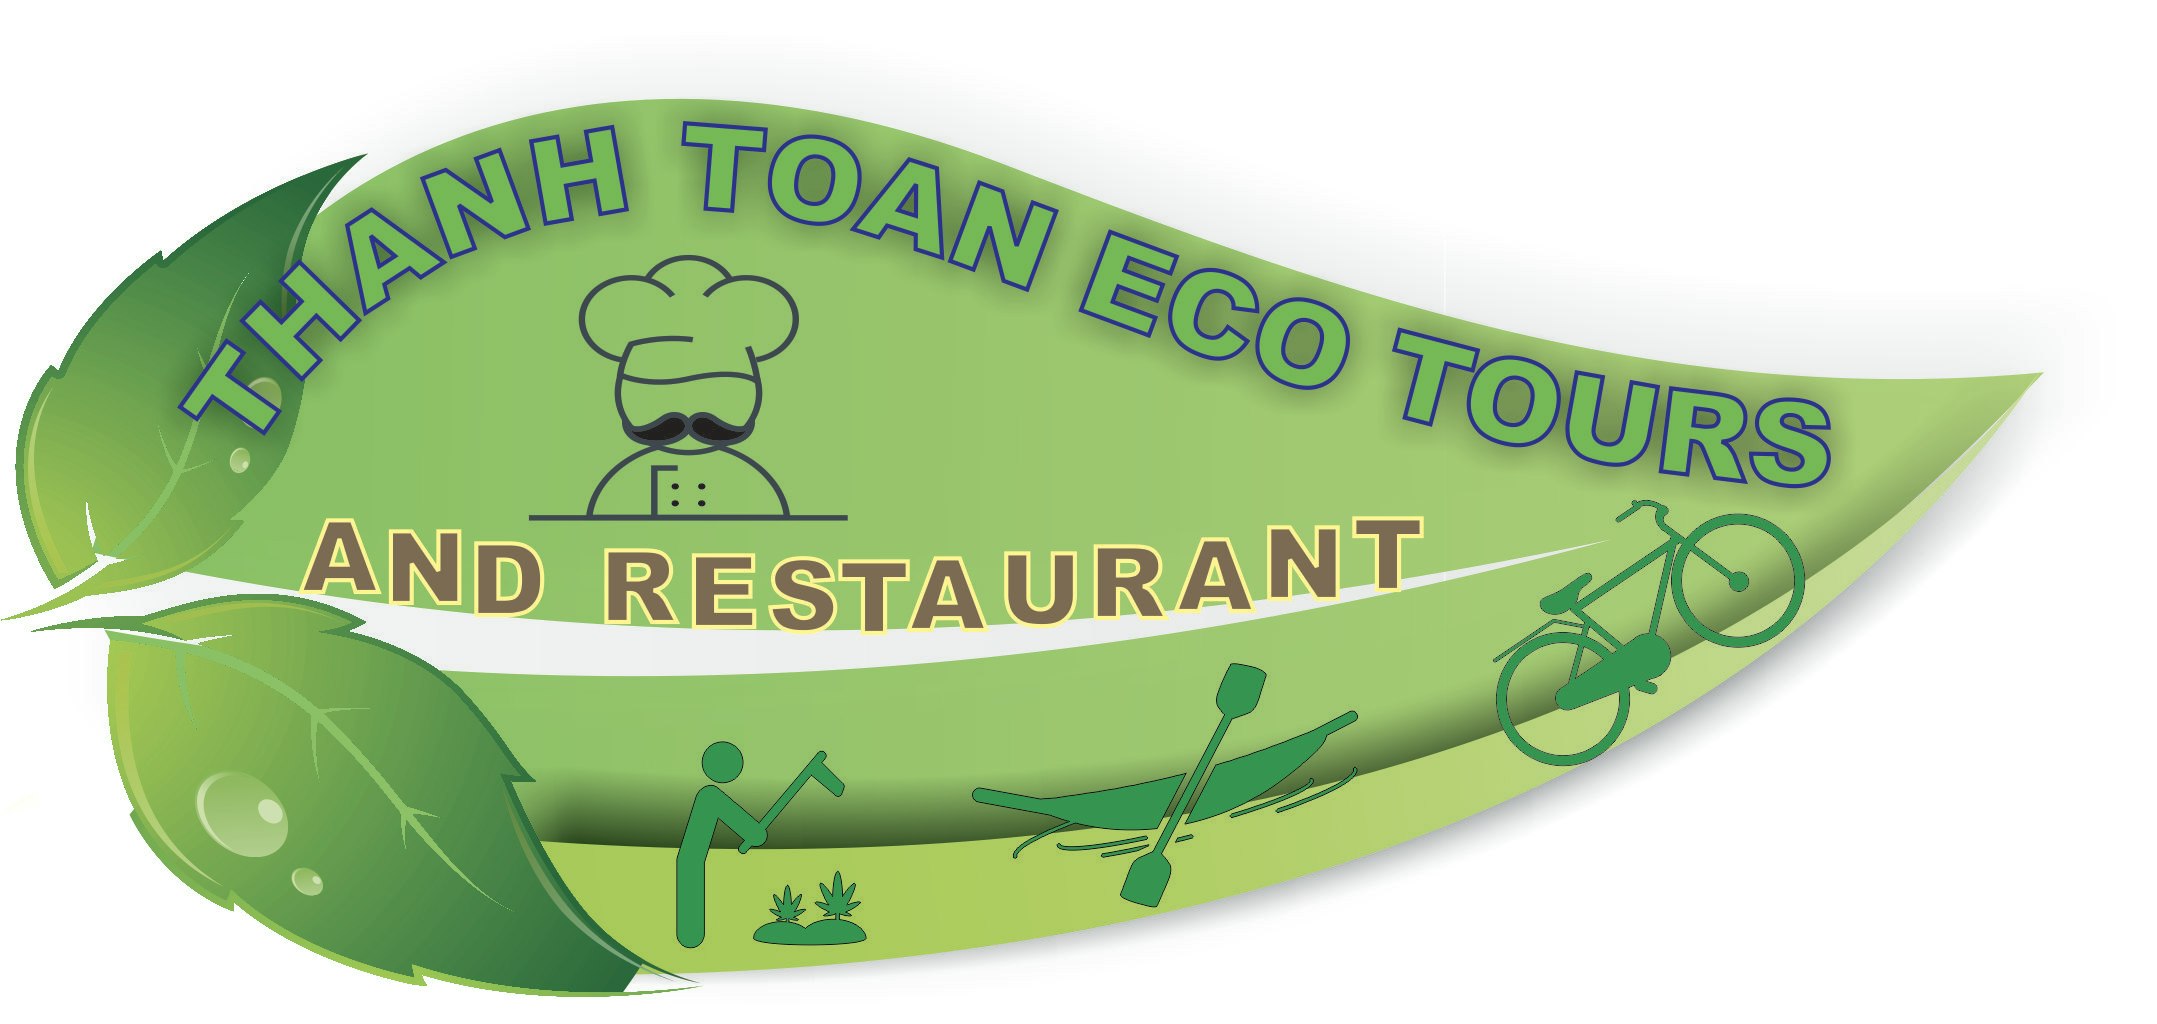 Thanh Toan Eco Tours